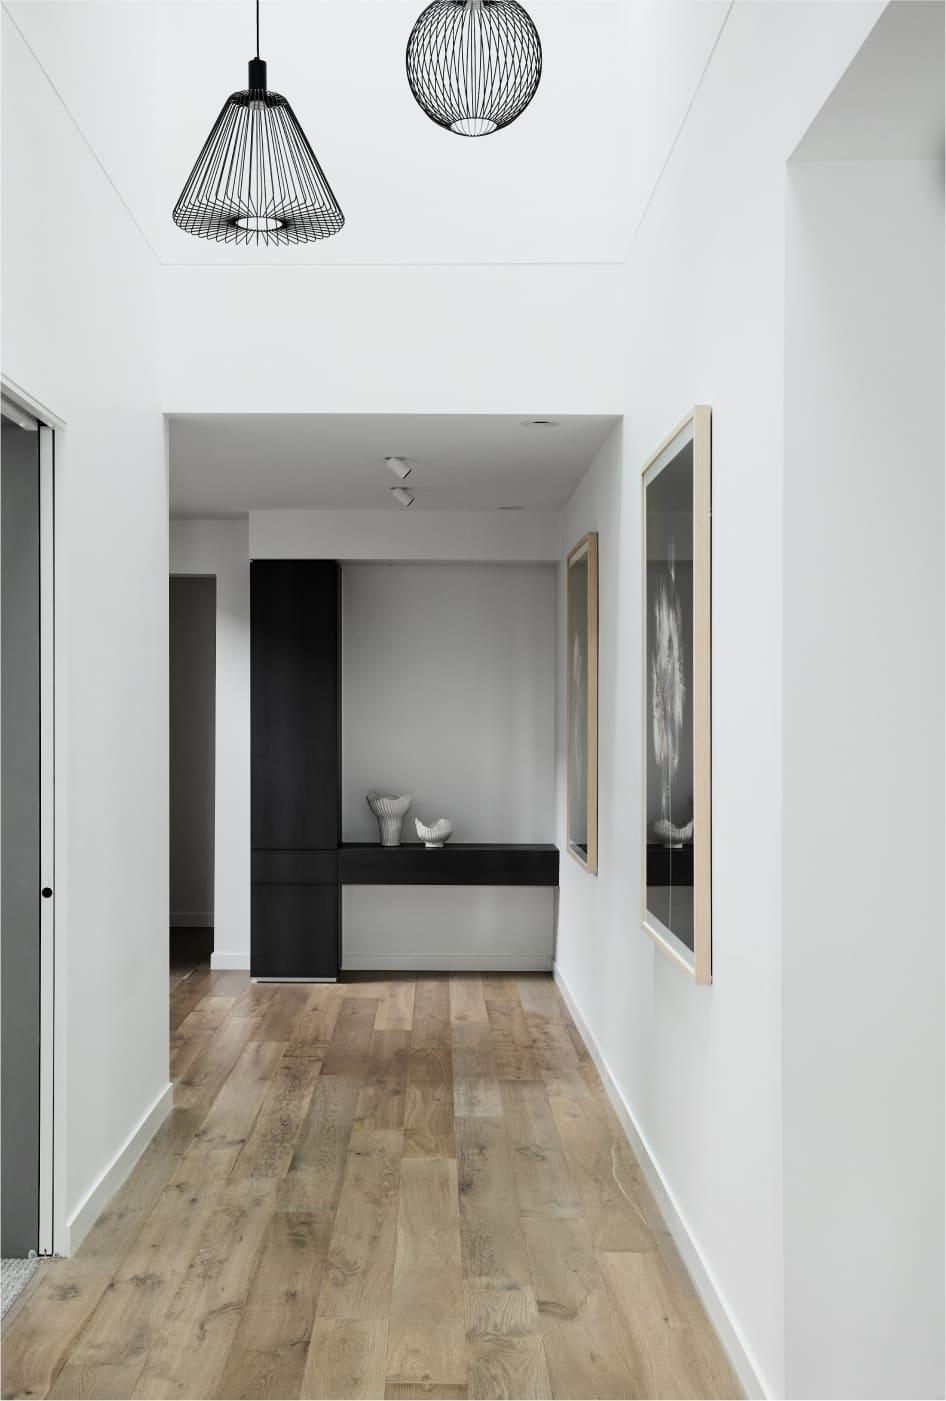 Expansive hallway with timber floors and feature void pendants